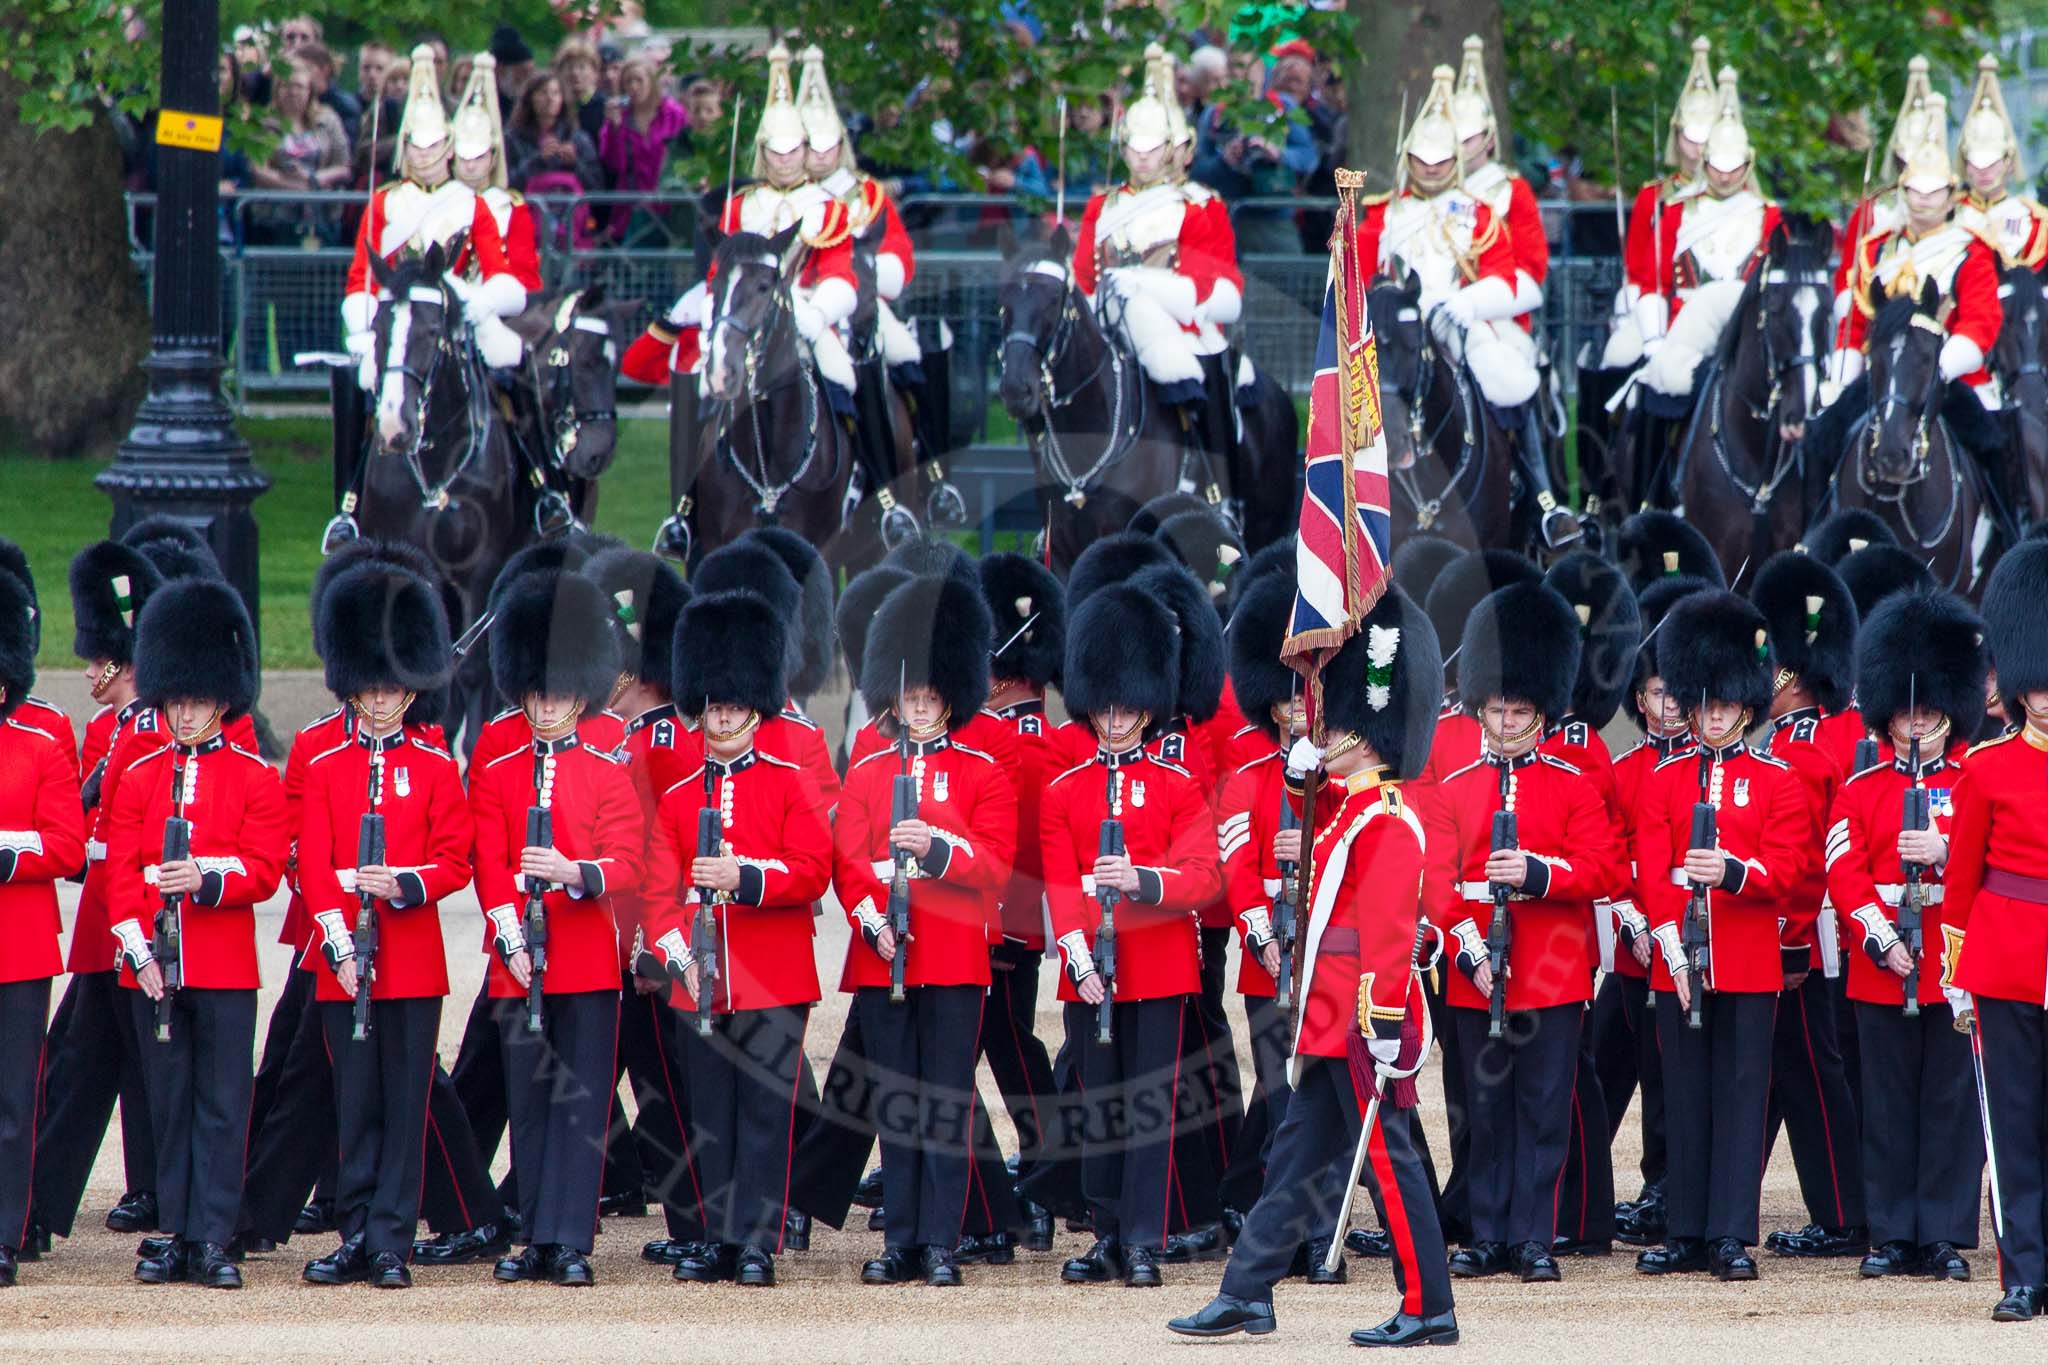 Major General's Review 2013: The Escort to the Colour has trooped the Colour past No. 2 Guard, 1st Battalion Welsh Guards, and is now almost back to their initial position, when they were the Escort for the Colour..
Horse Guards Parade, Westminster,
London SW1,

United Kingdom,
on 01 June 2013 at 11:25, image #436